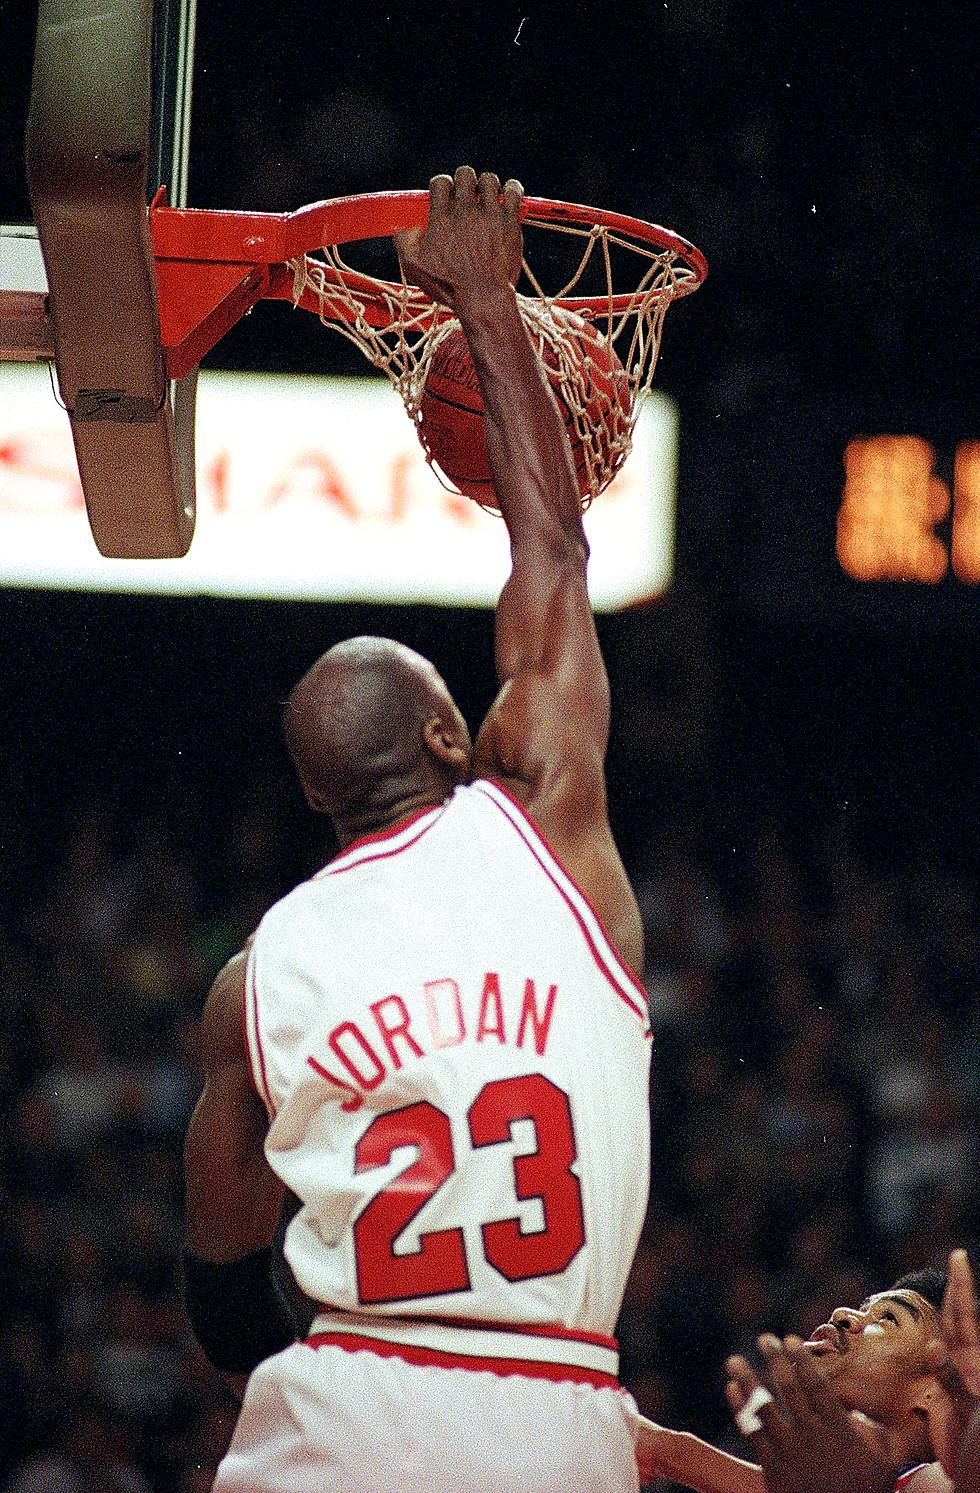 Survey Says: Jordan Could Beat LeBron, Plus Other Sports Results